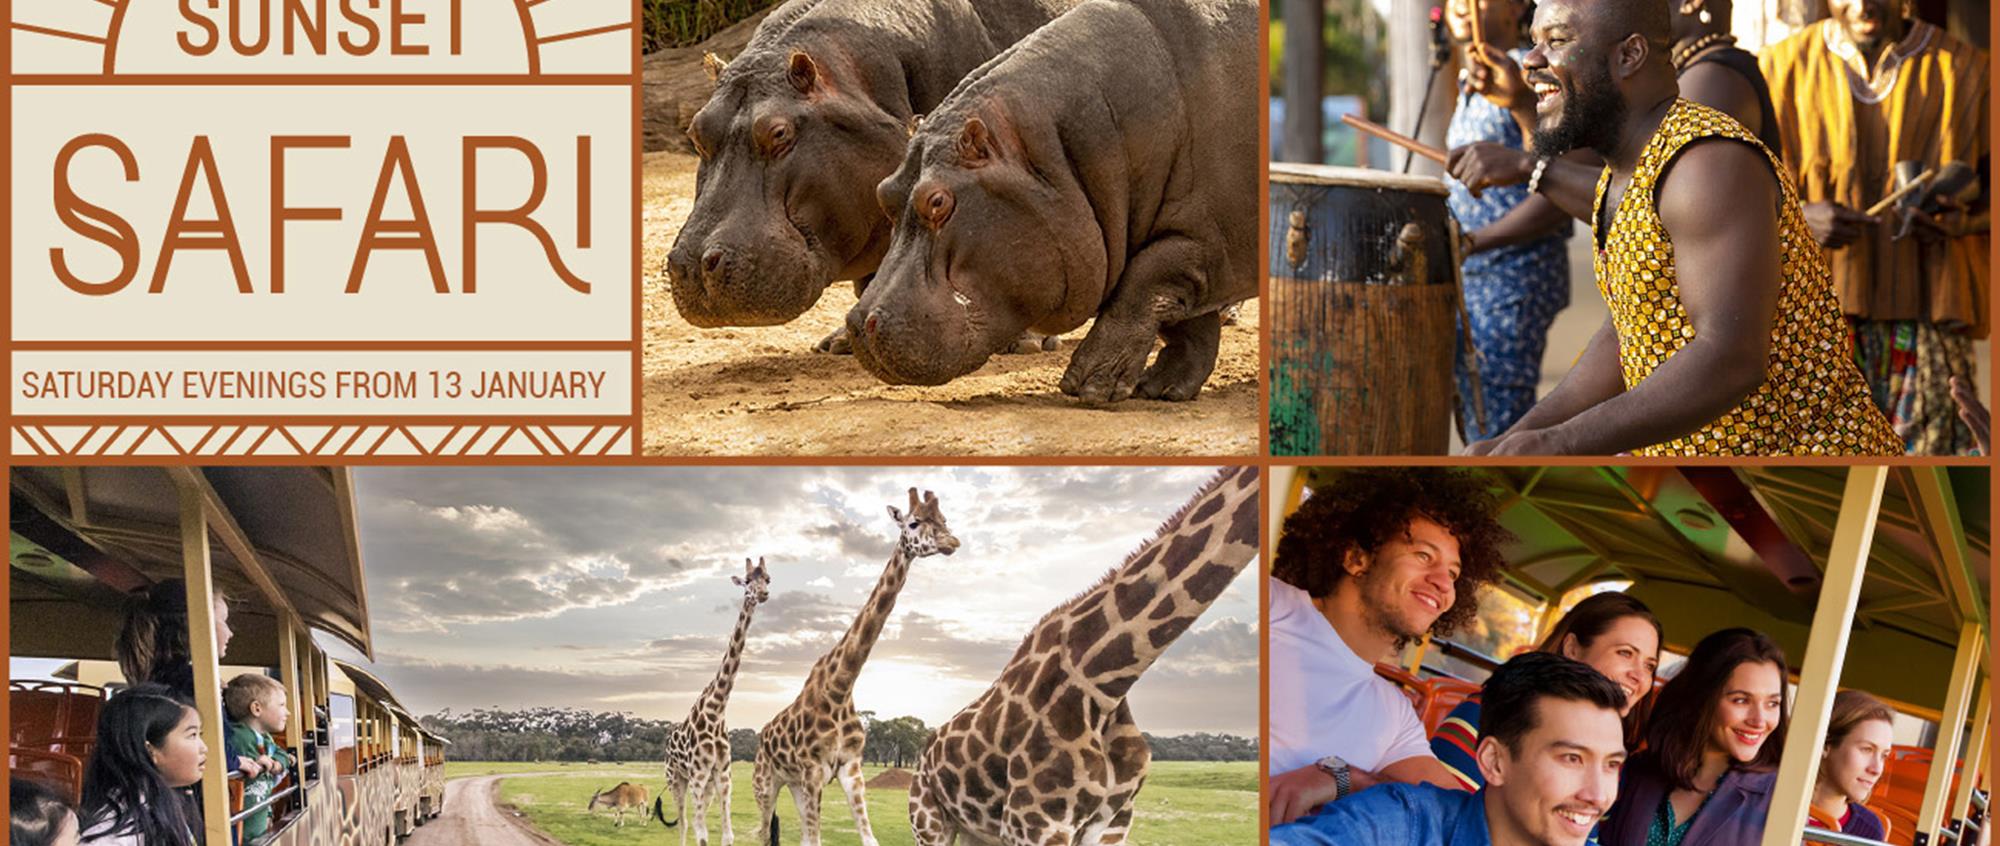 "Sunset Safari: Saturday evenings from 13 January"; images include two Hippopotamuses, four African drummers, a Safari bus running parallel to three Giraffes and a Gazelle, and a crowd of guests looking out of a bus.